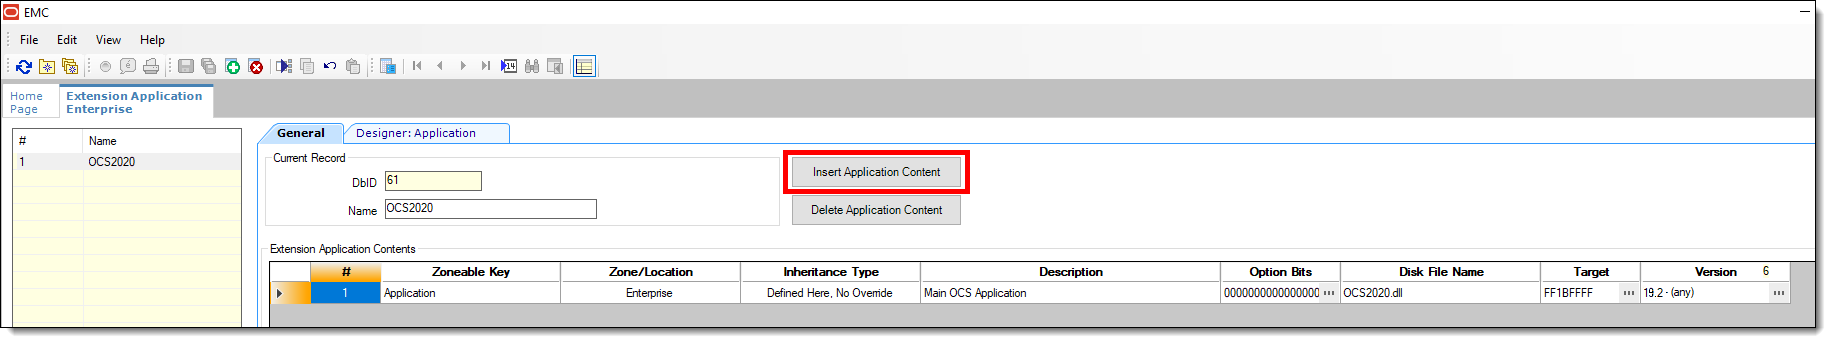 This figure shows the EMC’s Extension Application module with the Insert Application Content button outlined in red.